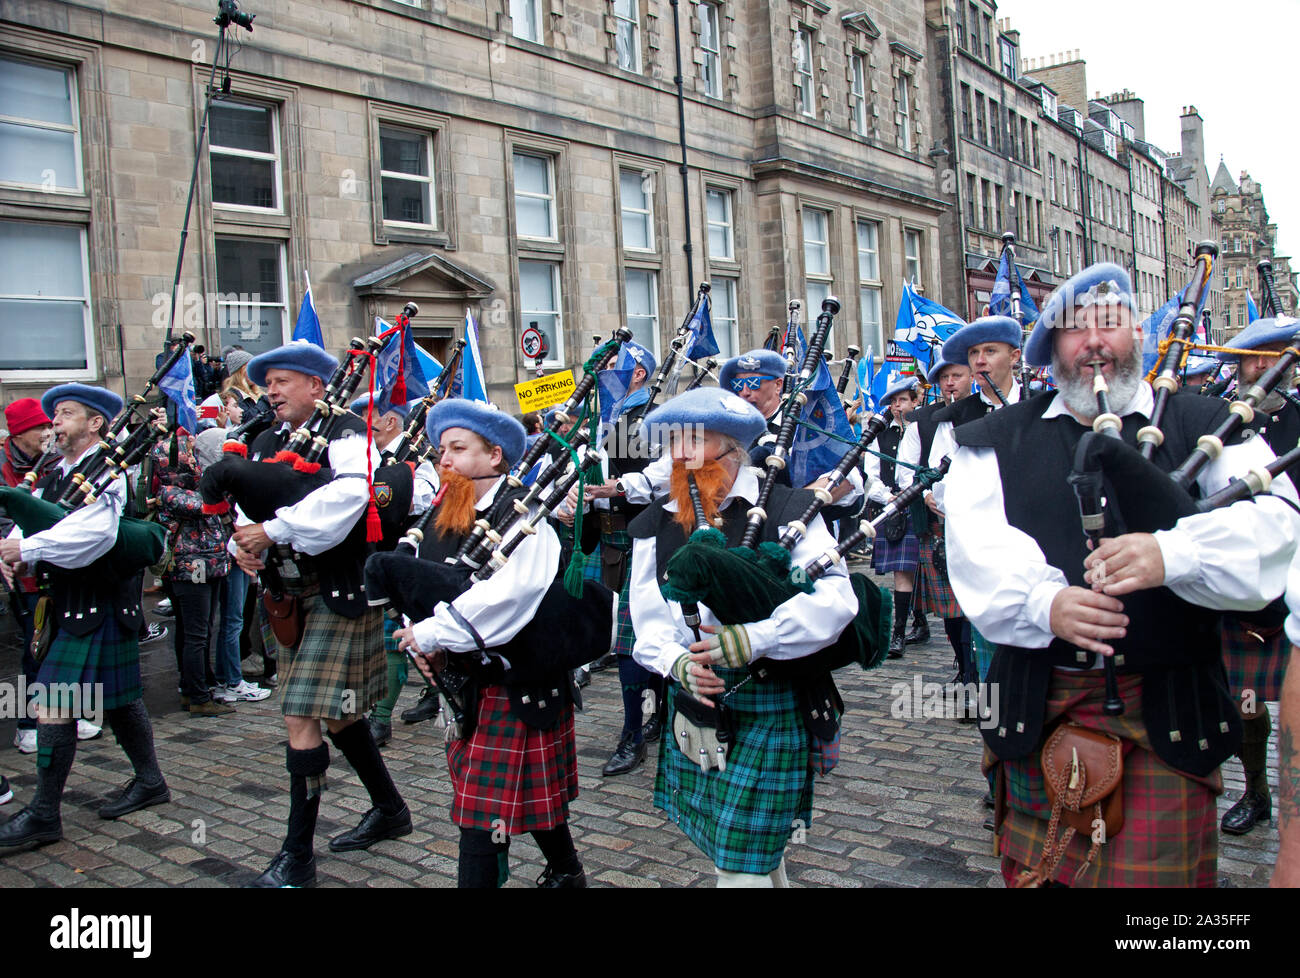 Edinburgh, Scotland, UK. 5th October 2019. Thousands of people of all ages marched on the streets ofEdinburgh in a pro-Scottish independence march through the streets of Edinburgh. Organisations and groups who support separation from the United Kingdom joined the All Under One Banner (AUOB) procession on Saturday. Pictured 'Saor Alba' pipes and drums. AUOB estimate that at least 100,000 people might join the rally. Stock Photo